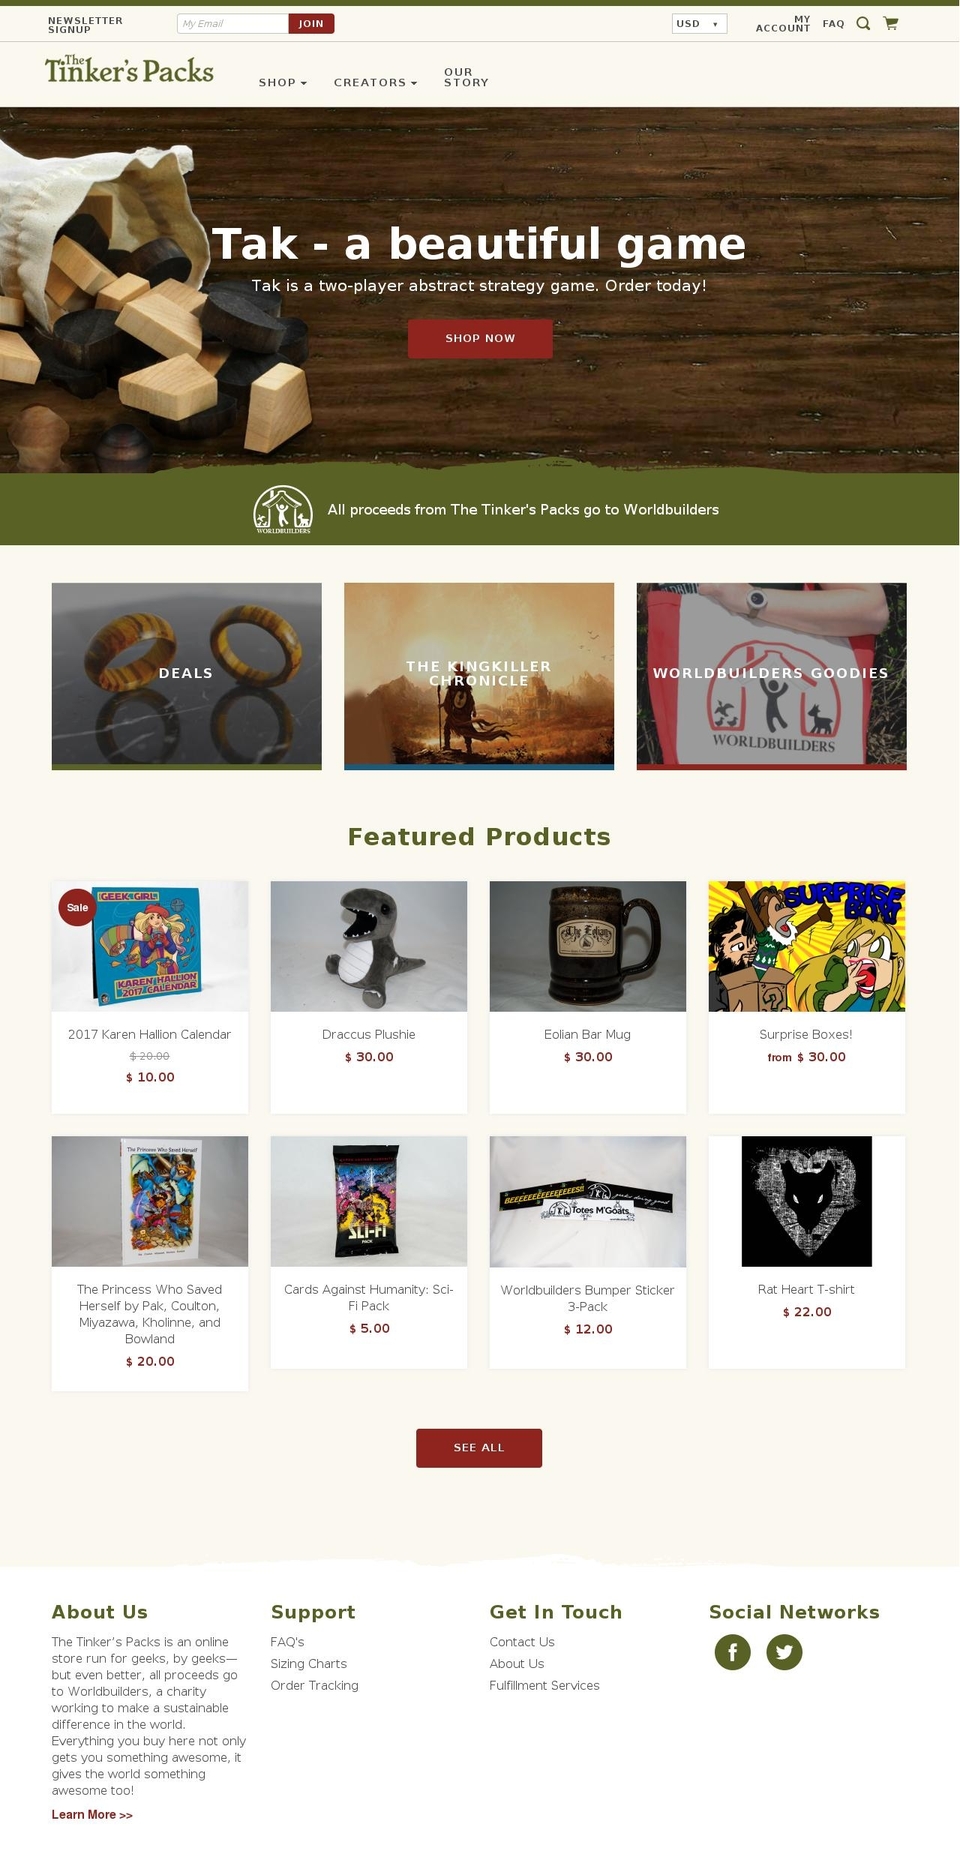 Dawn Shopify theme site example thetinkerspacks.com